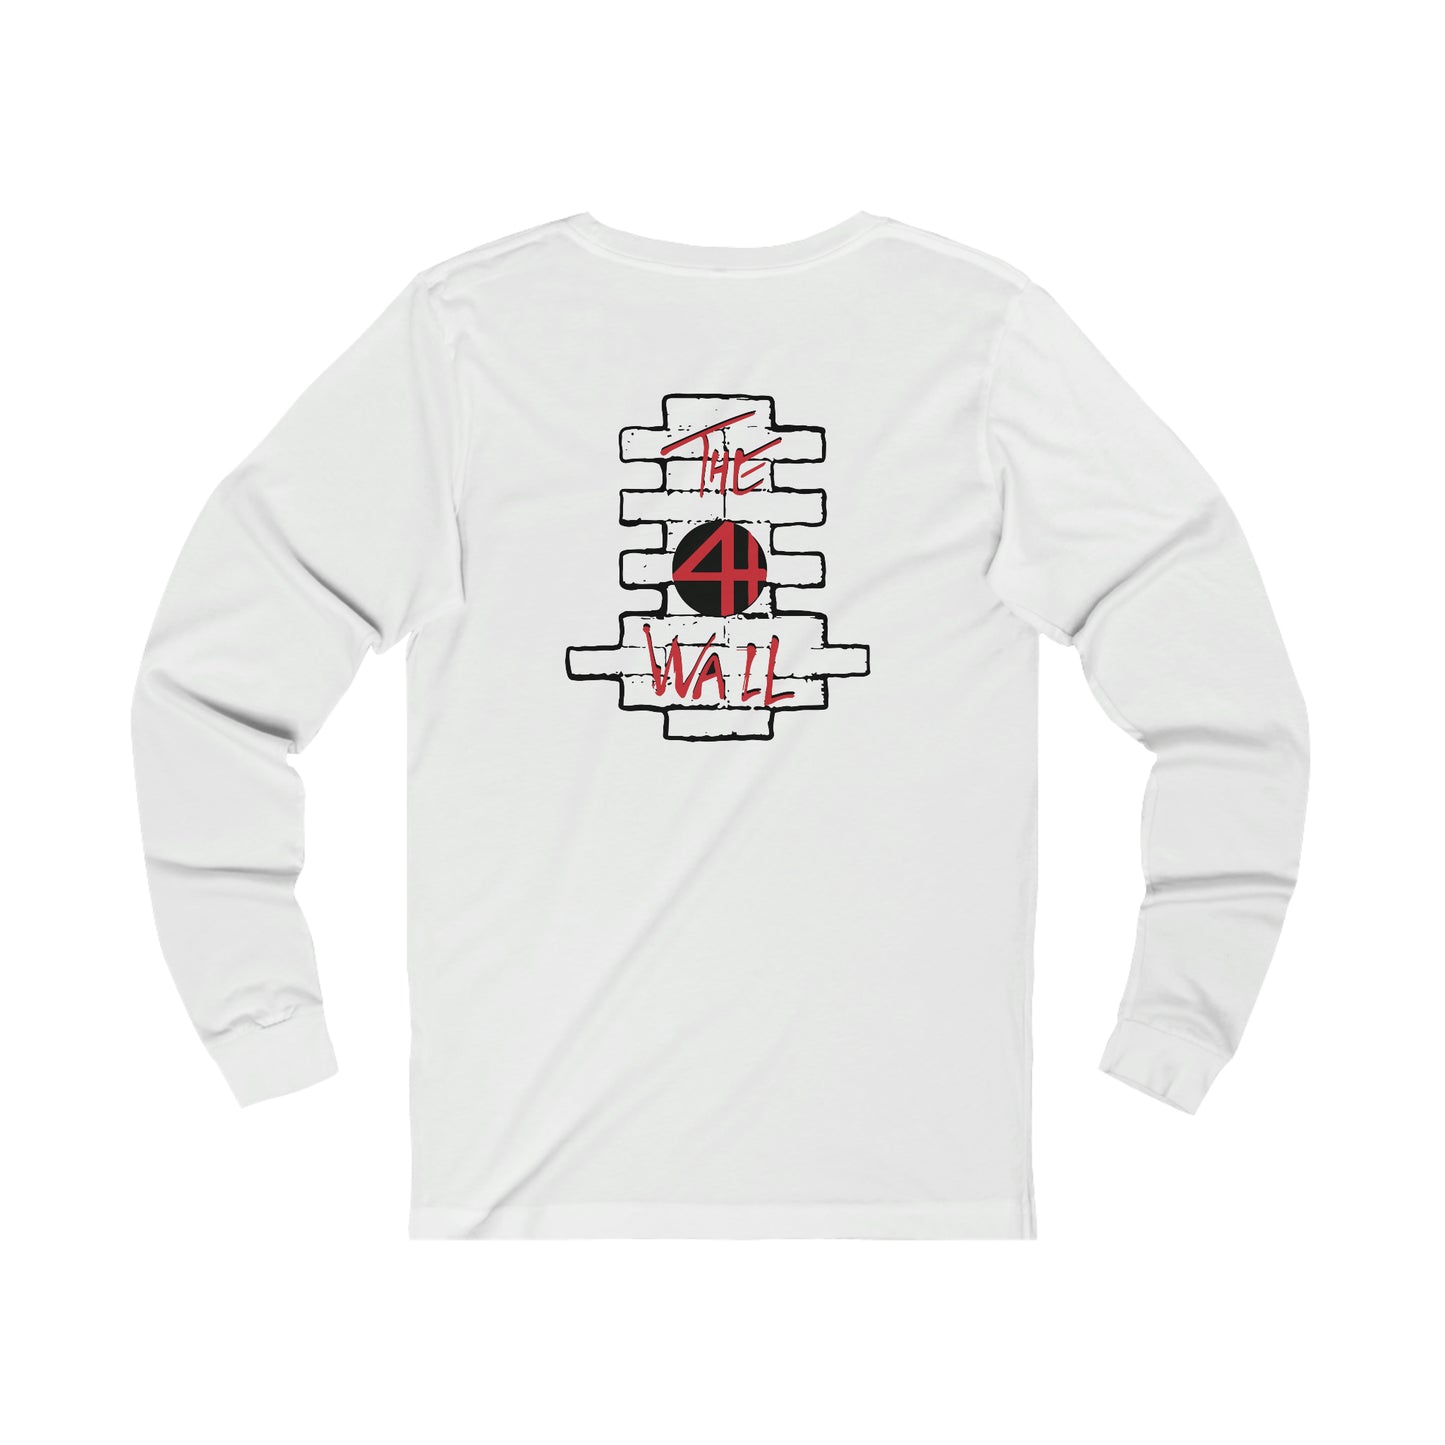 4th Wall The Wall Unisex Jersey Long Sleeve Tee